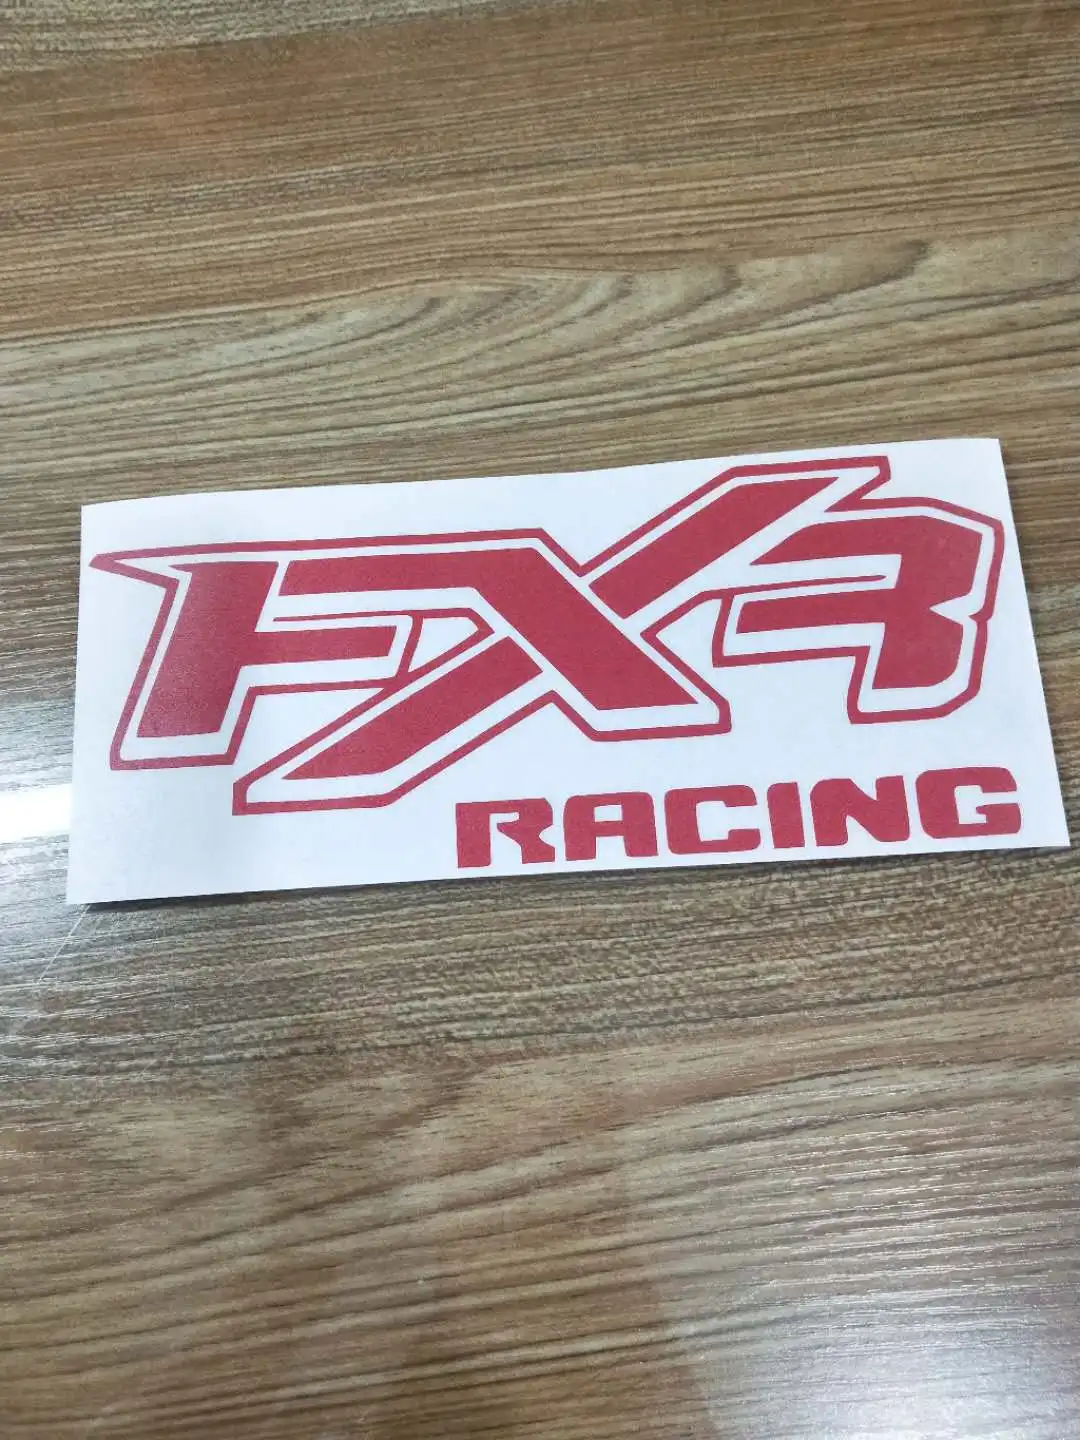 

Fxr racing STICKERS decal Cool Graphics interesting fashion Car Sticker automobiles & motorcycles car accessories